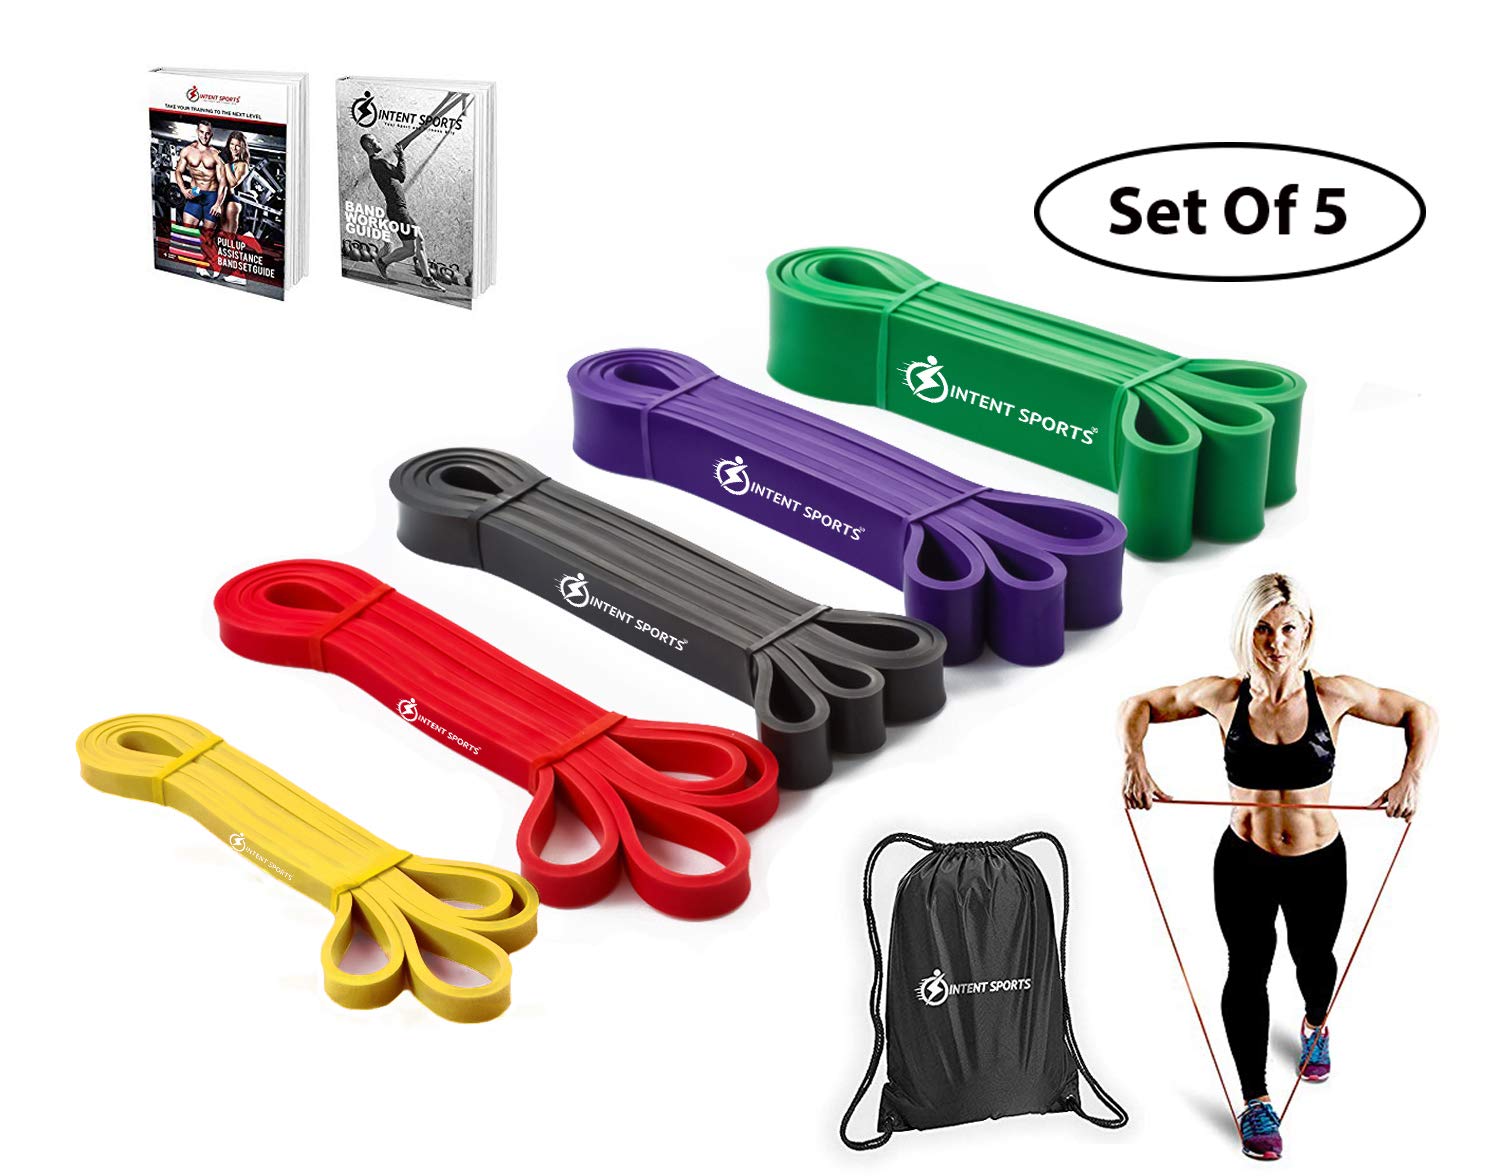 Qoo10 - Pedal Puller Elastic Yoga Band Workout Home Exercise Sports  Training 4 : Sports Equipment